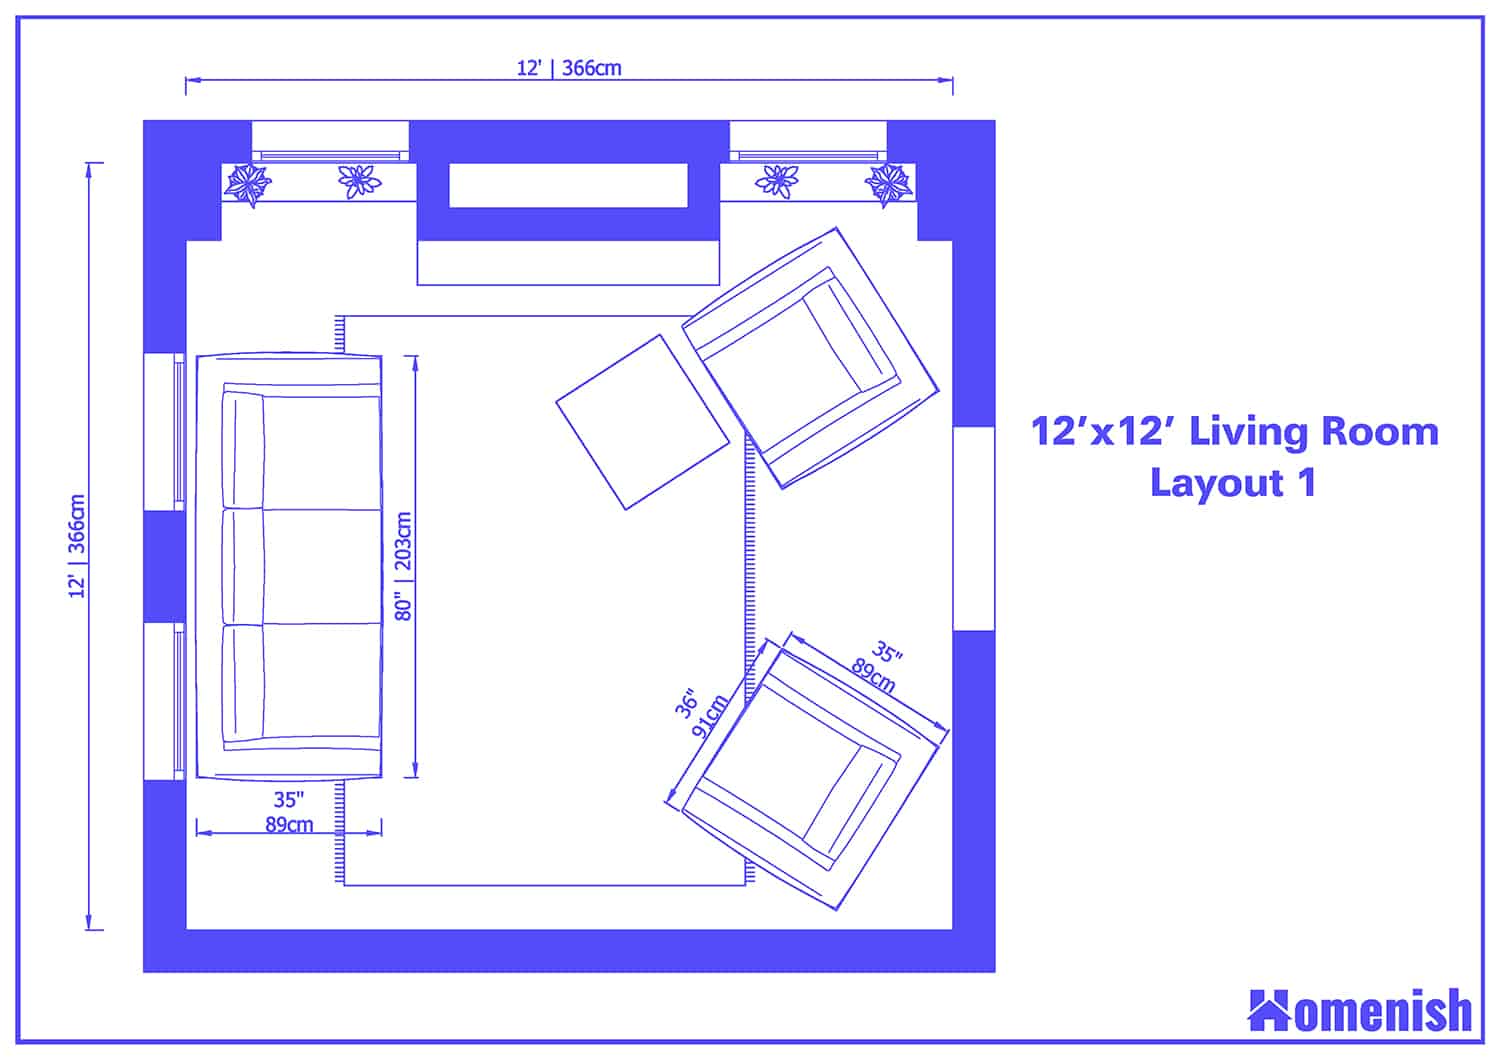 14x12 living room layout